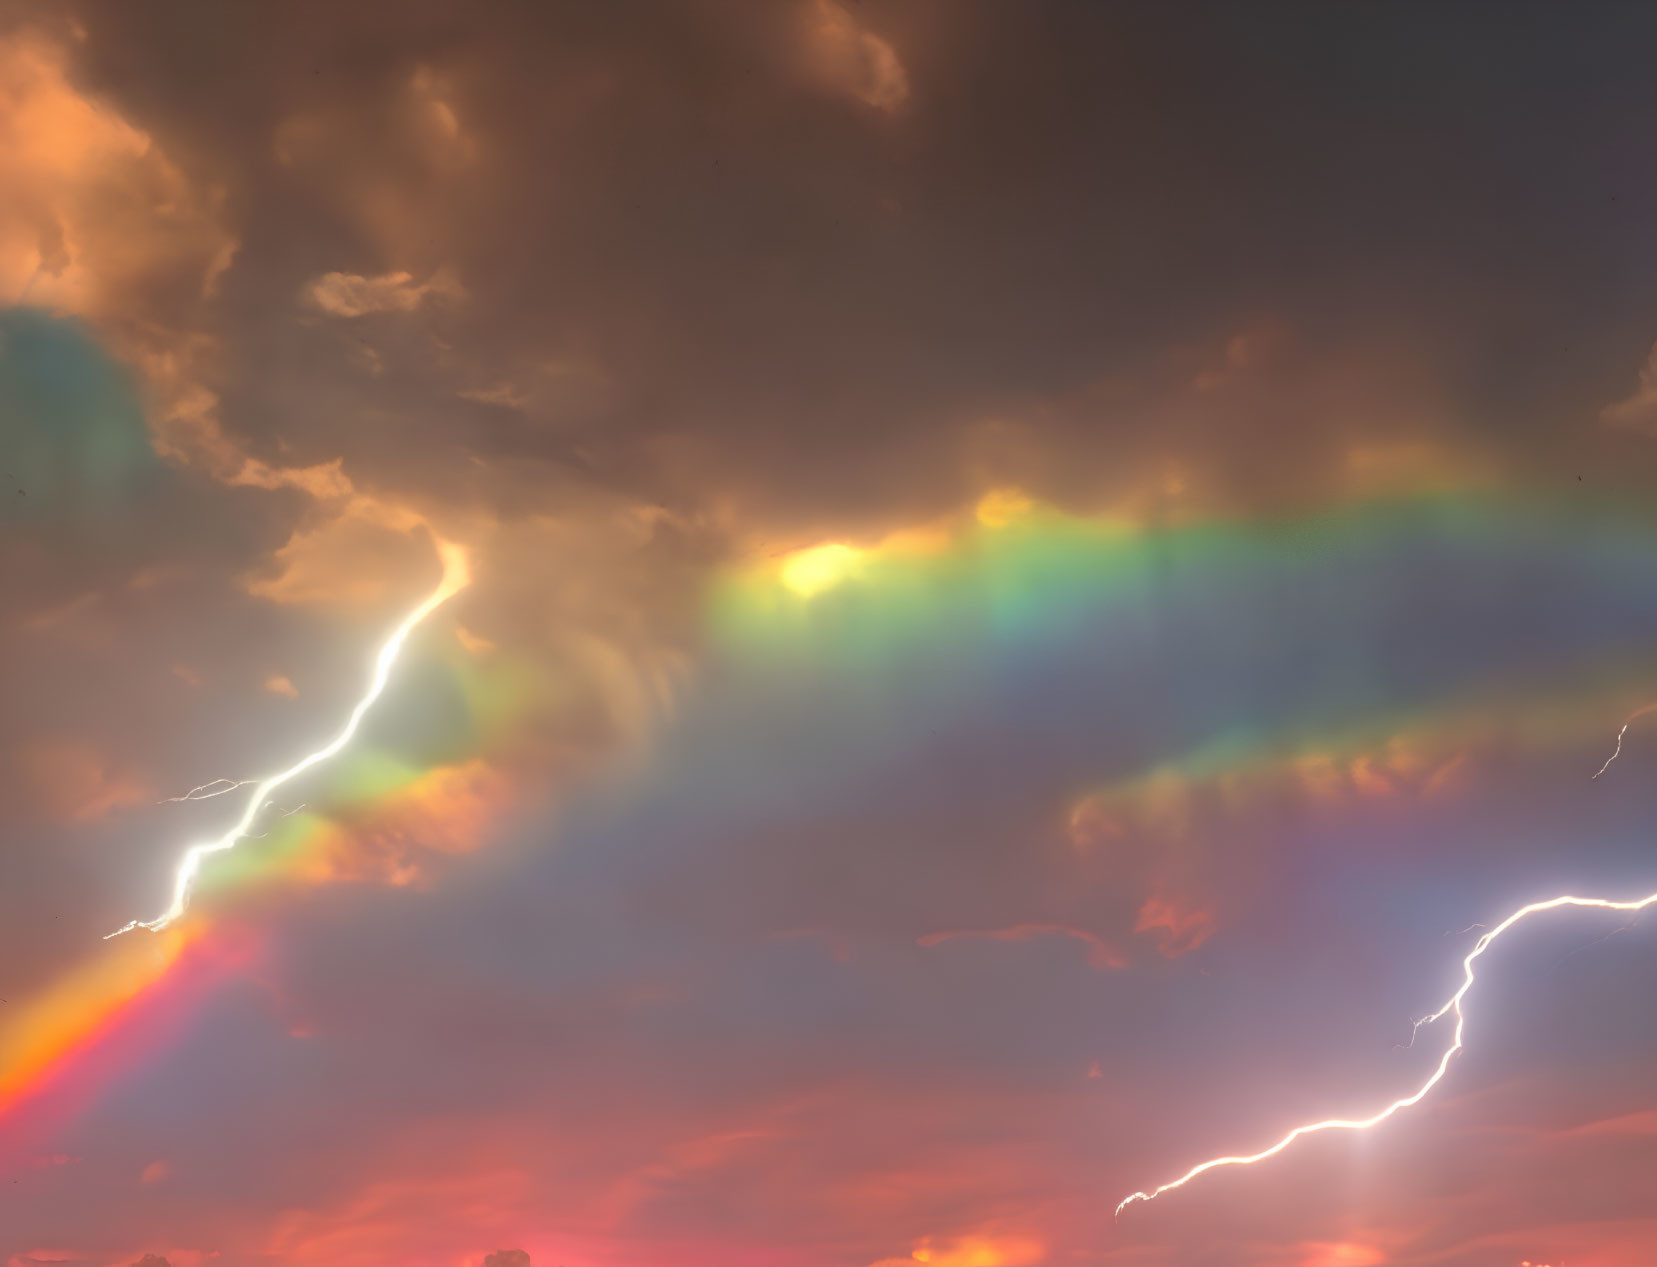 Iridescent Cloud Colors and Lightning in Stormy Sky